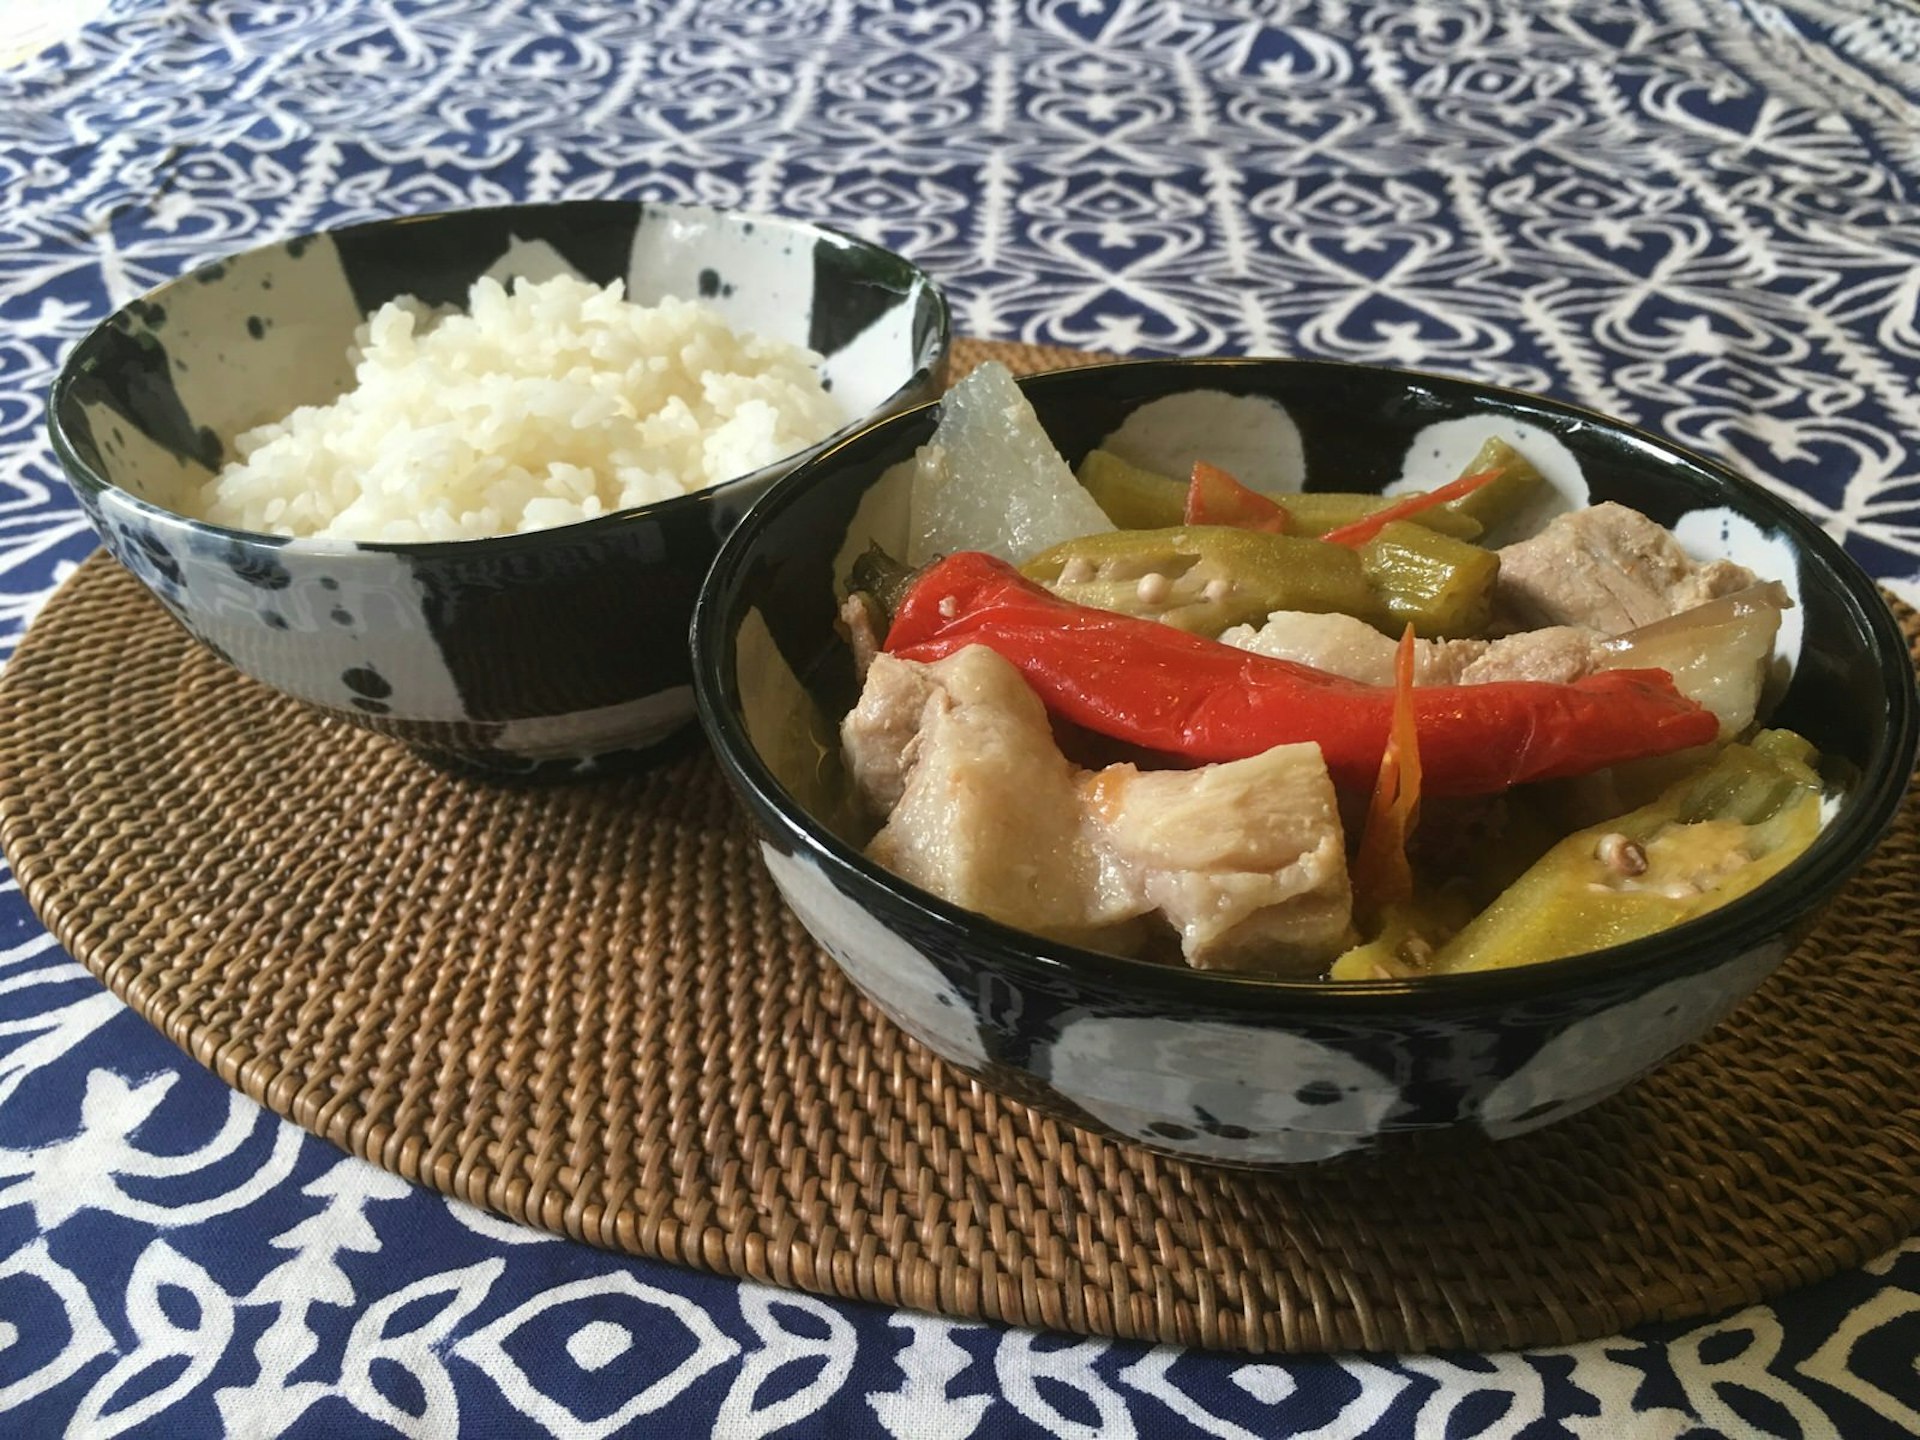 Sinigang with a side of rice